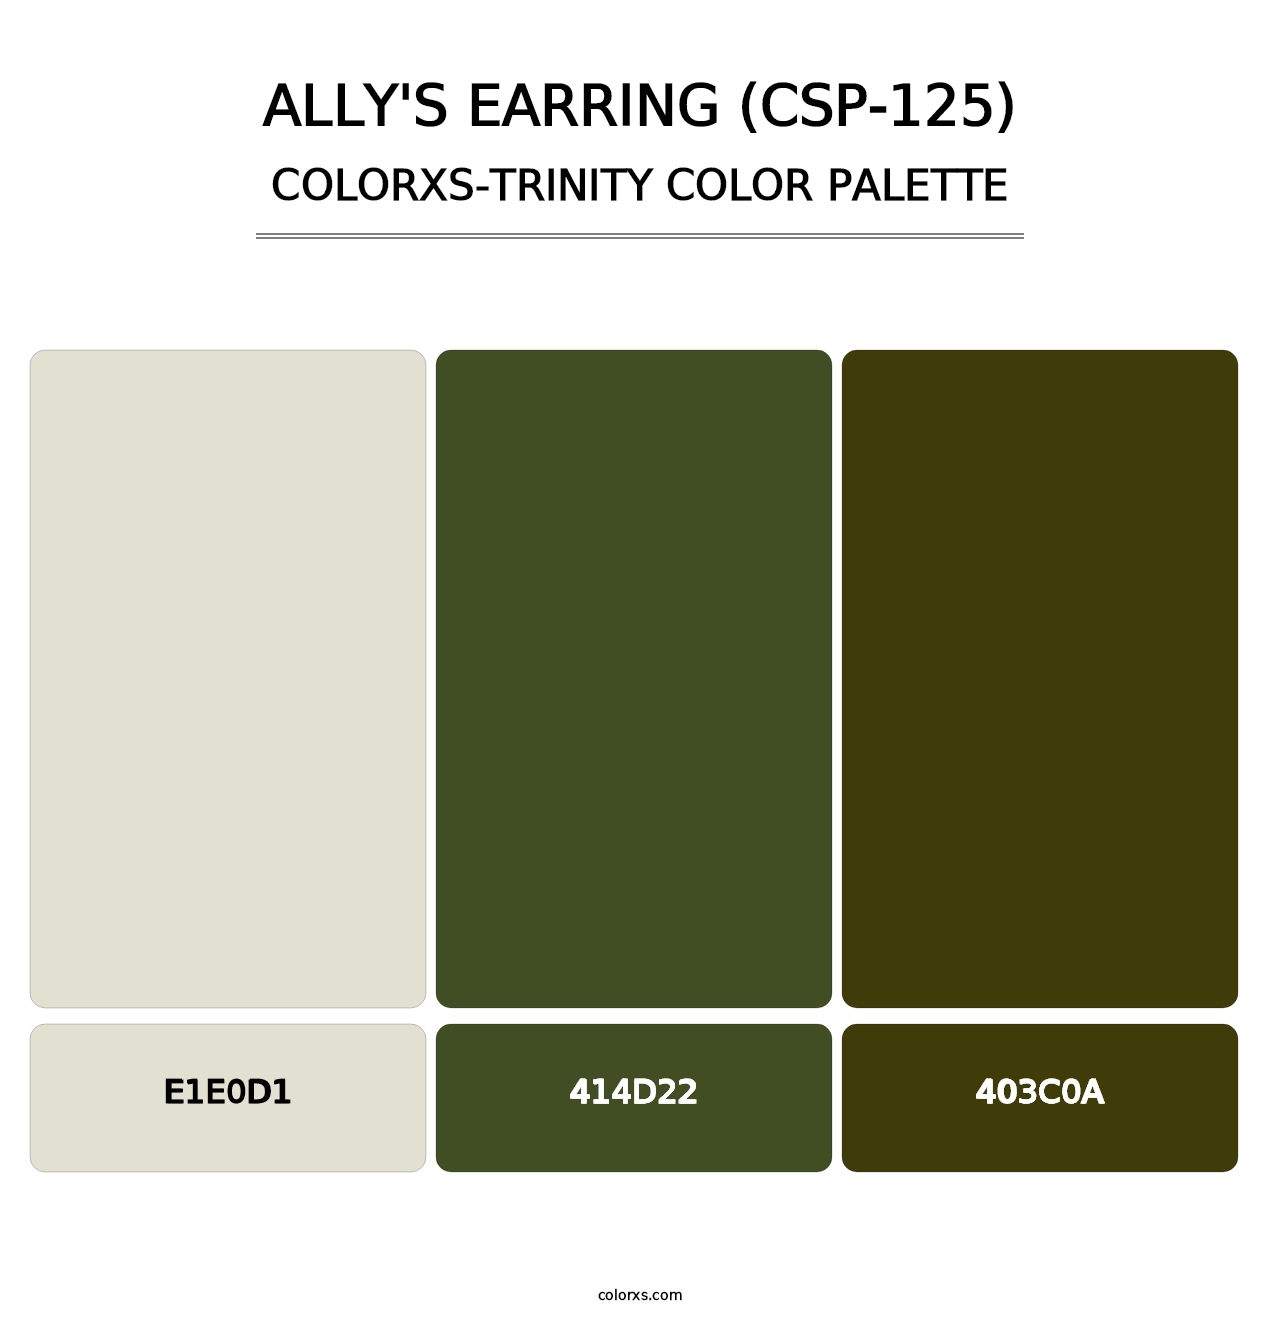 Ally's Earring (CSP-125) - Colorxs Trinity Palette